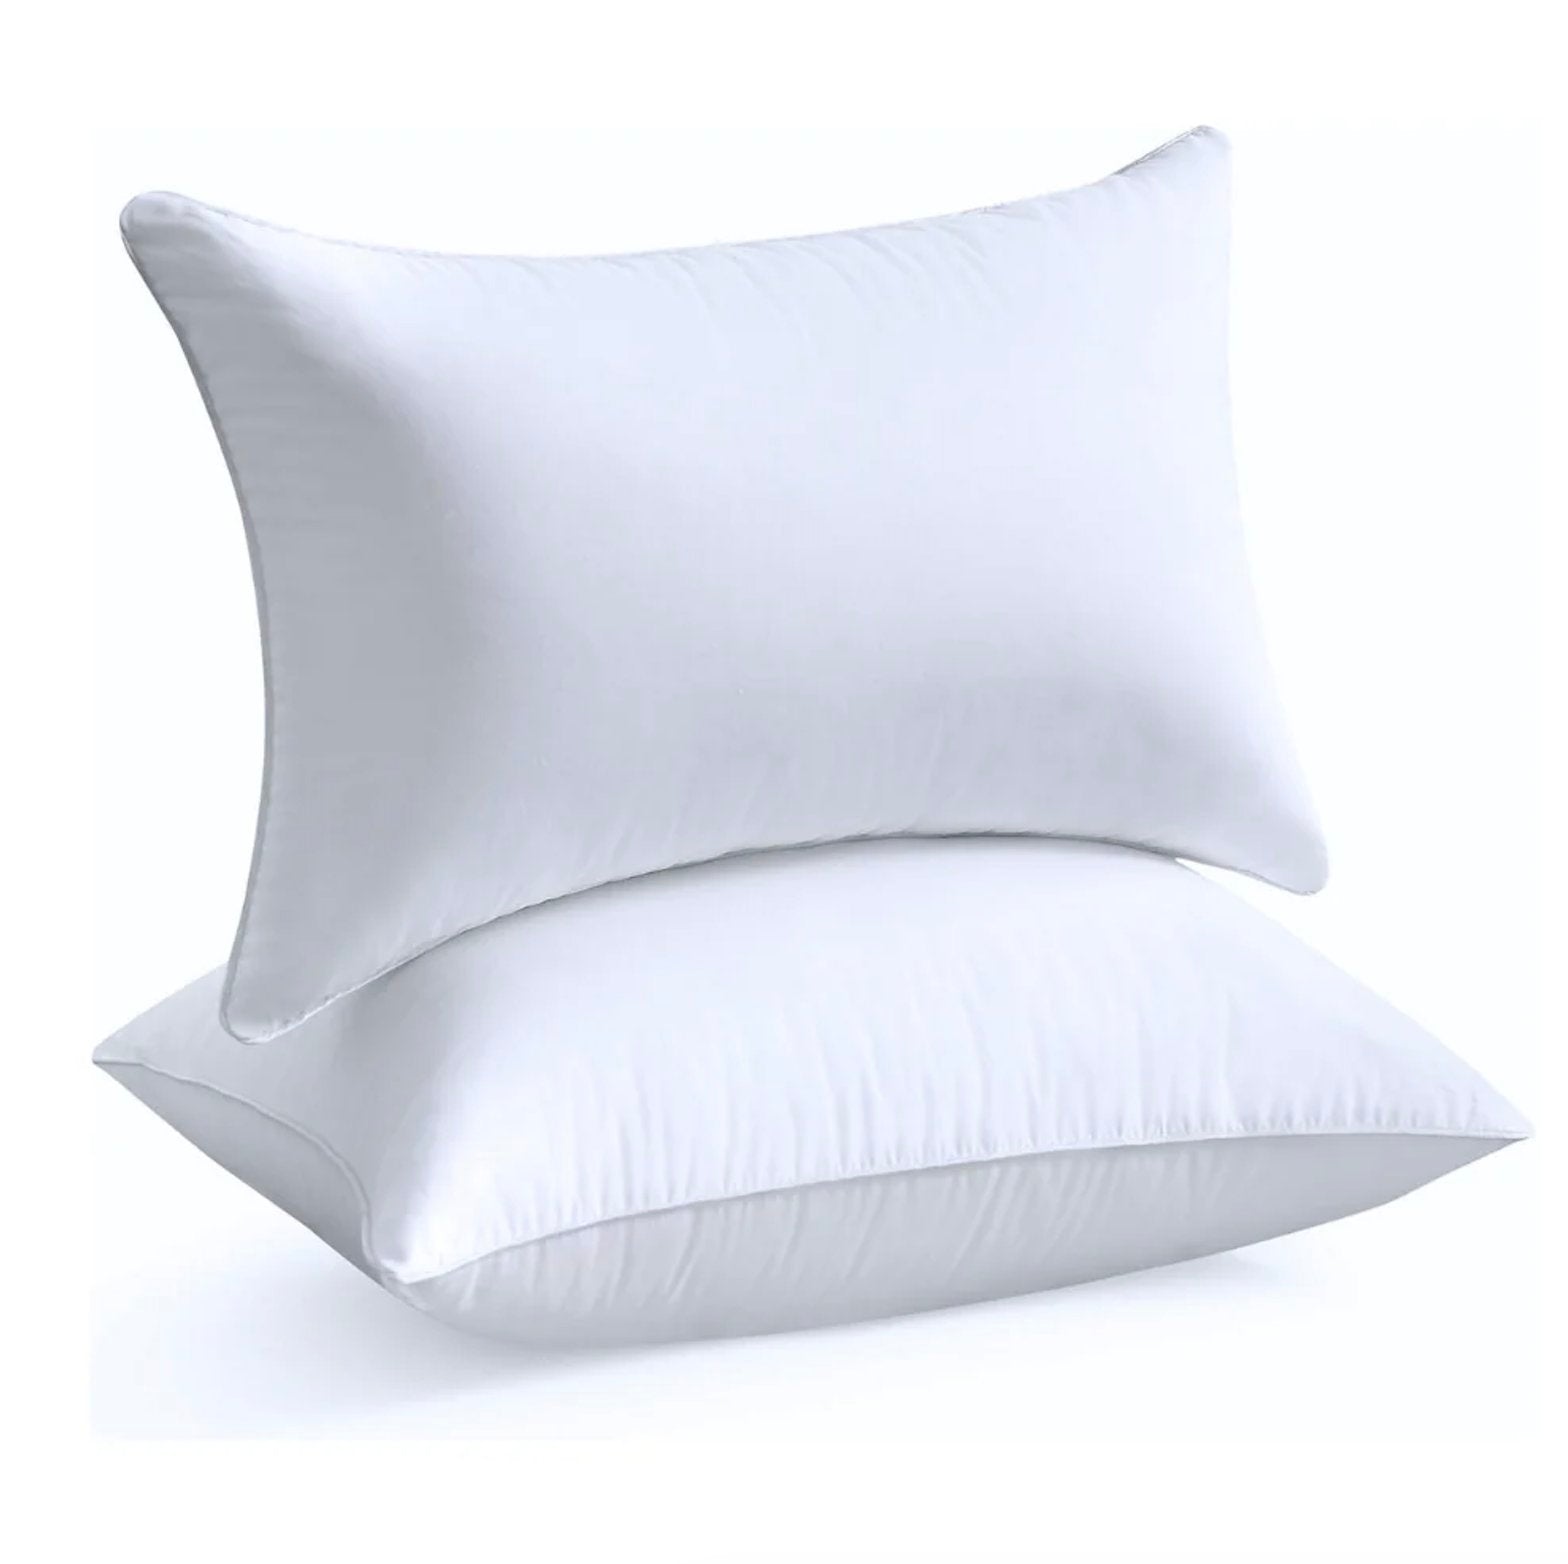 A view of pillow